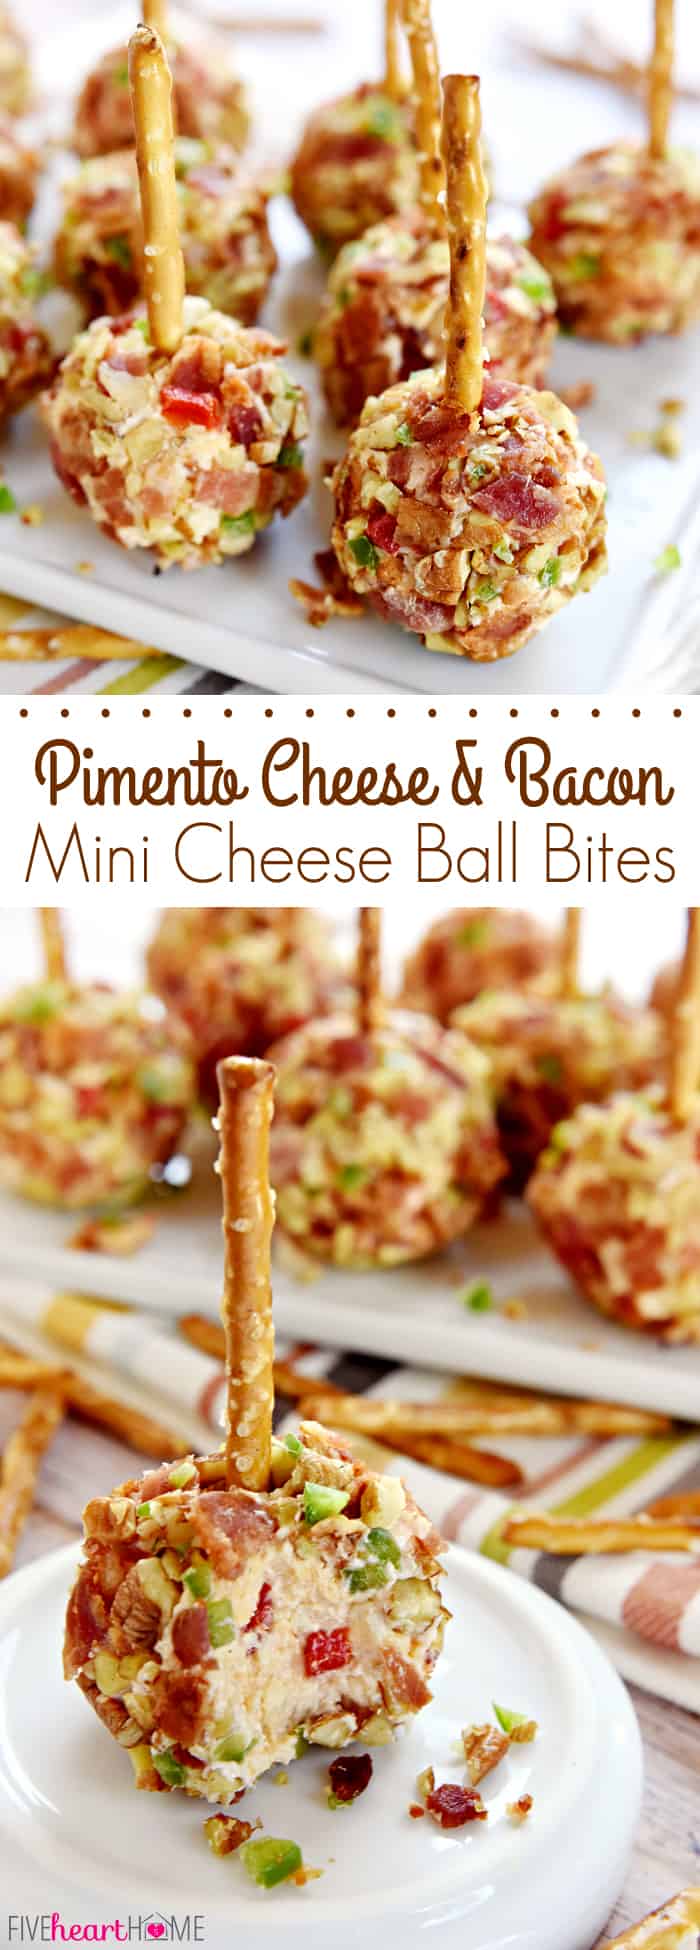 Pimento Cheese and Bacon Mini Cheese Ball Bites ~ mini cheese balls of homemade pimento cheese are rolled in a coating of crispy bacon, toasted pecans, and minced fresh jalapeños and then speared with a pretzel stick for fun, easy-to-eat appetizers, perfect for game day or any get-together! | FiveHeartHome.com via @fivehearthome